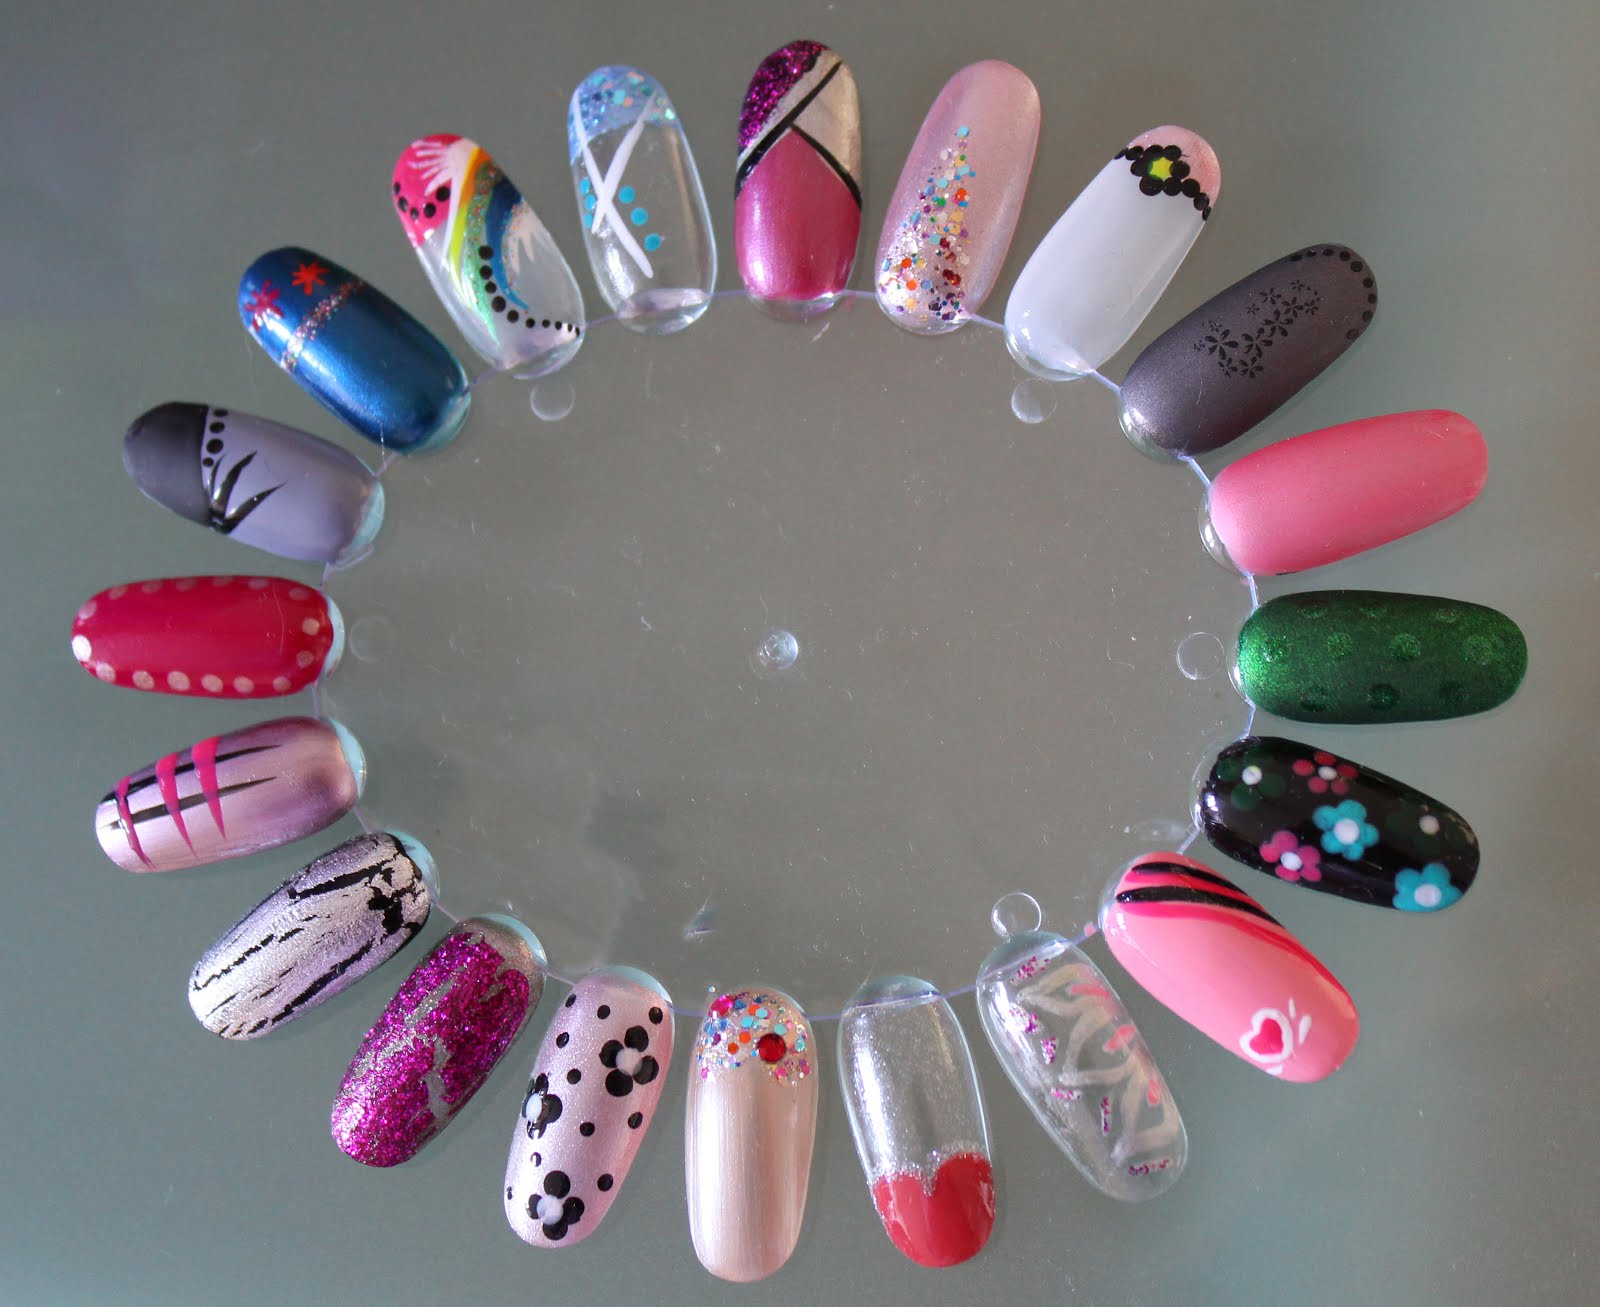 6. Creative Nail Art Display for Small Spaces - wide 8